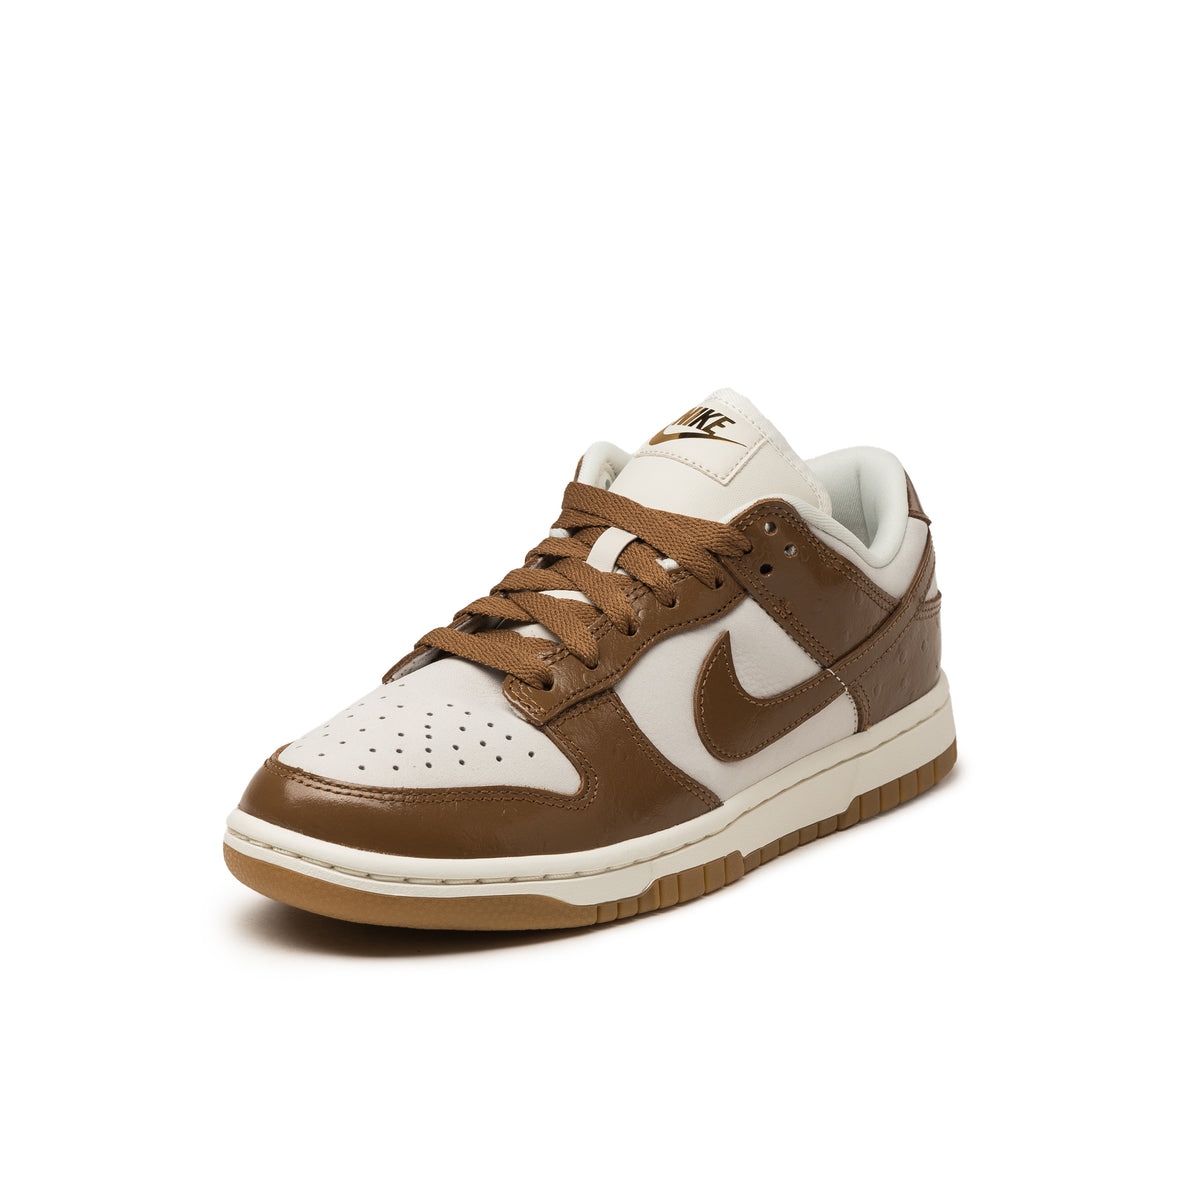 Nike Wmns Dunk Low LX *Ostrich* » Buy online now!